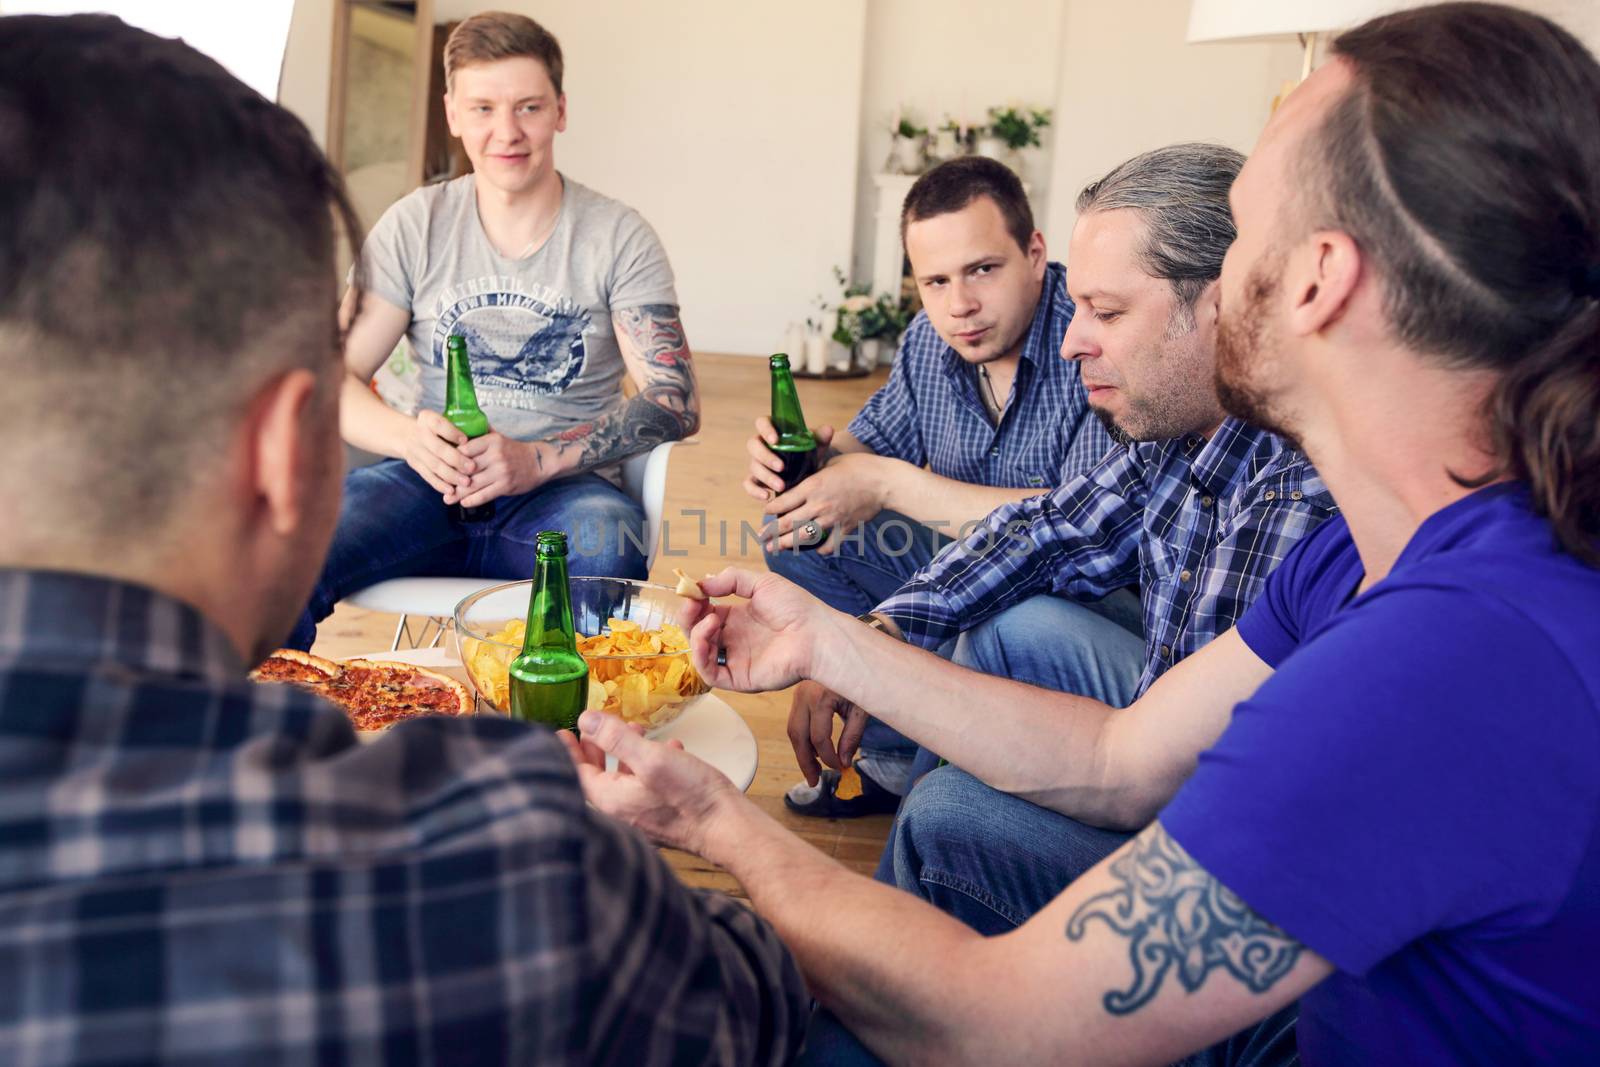 Group of men drinking beer, eating pizza, talking and smiling while resting at home on couch behind TV